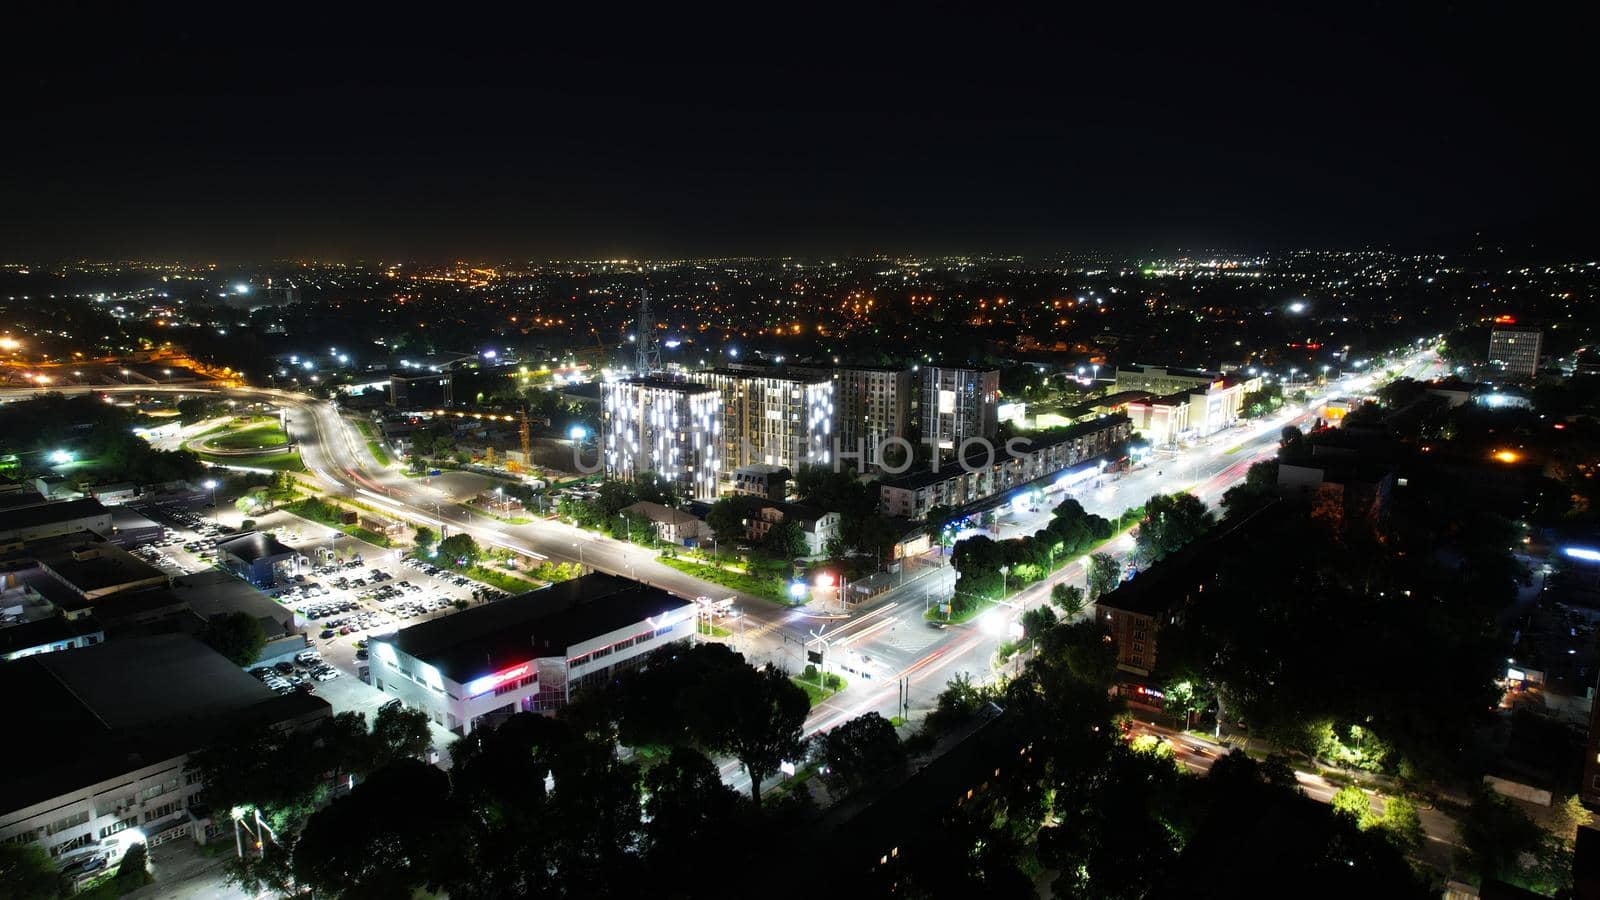 View from the height of the night city of Almaty. Different lights are shining brightly. Cars are driving along the intersection and the bridge. Green trees are growing. High-rise buildings stand out